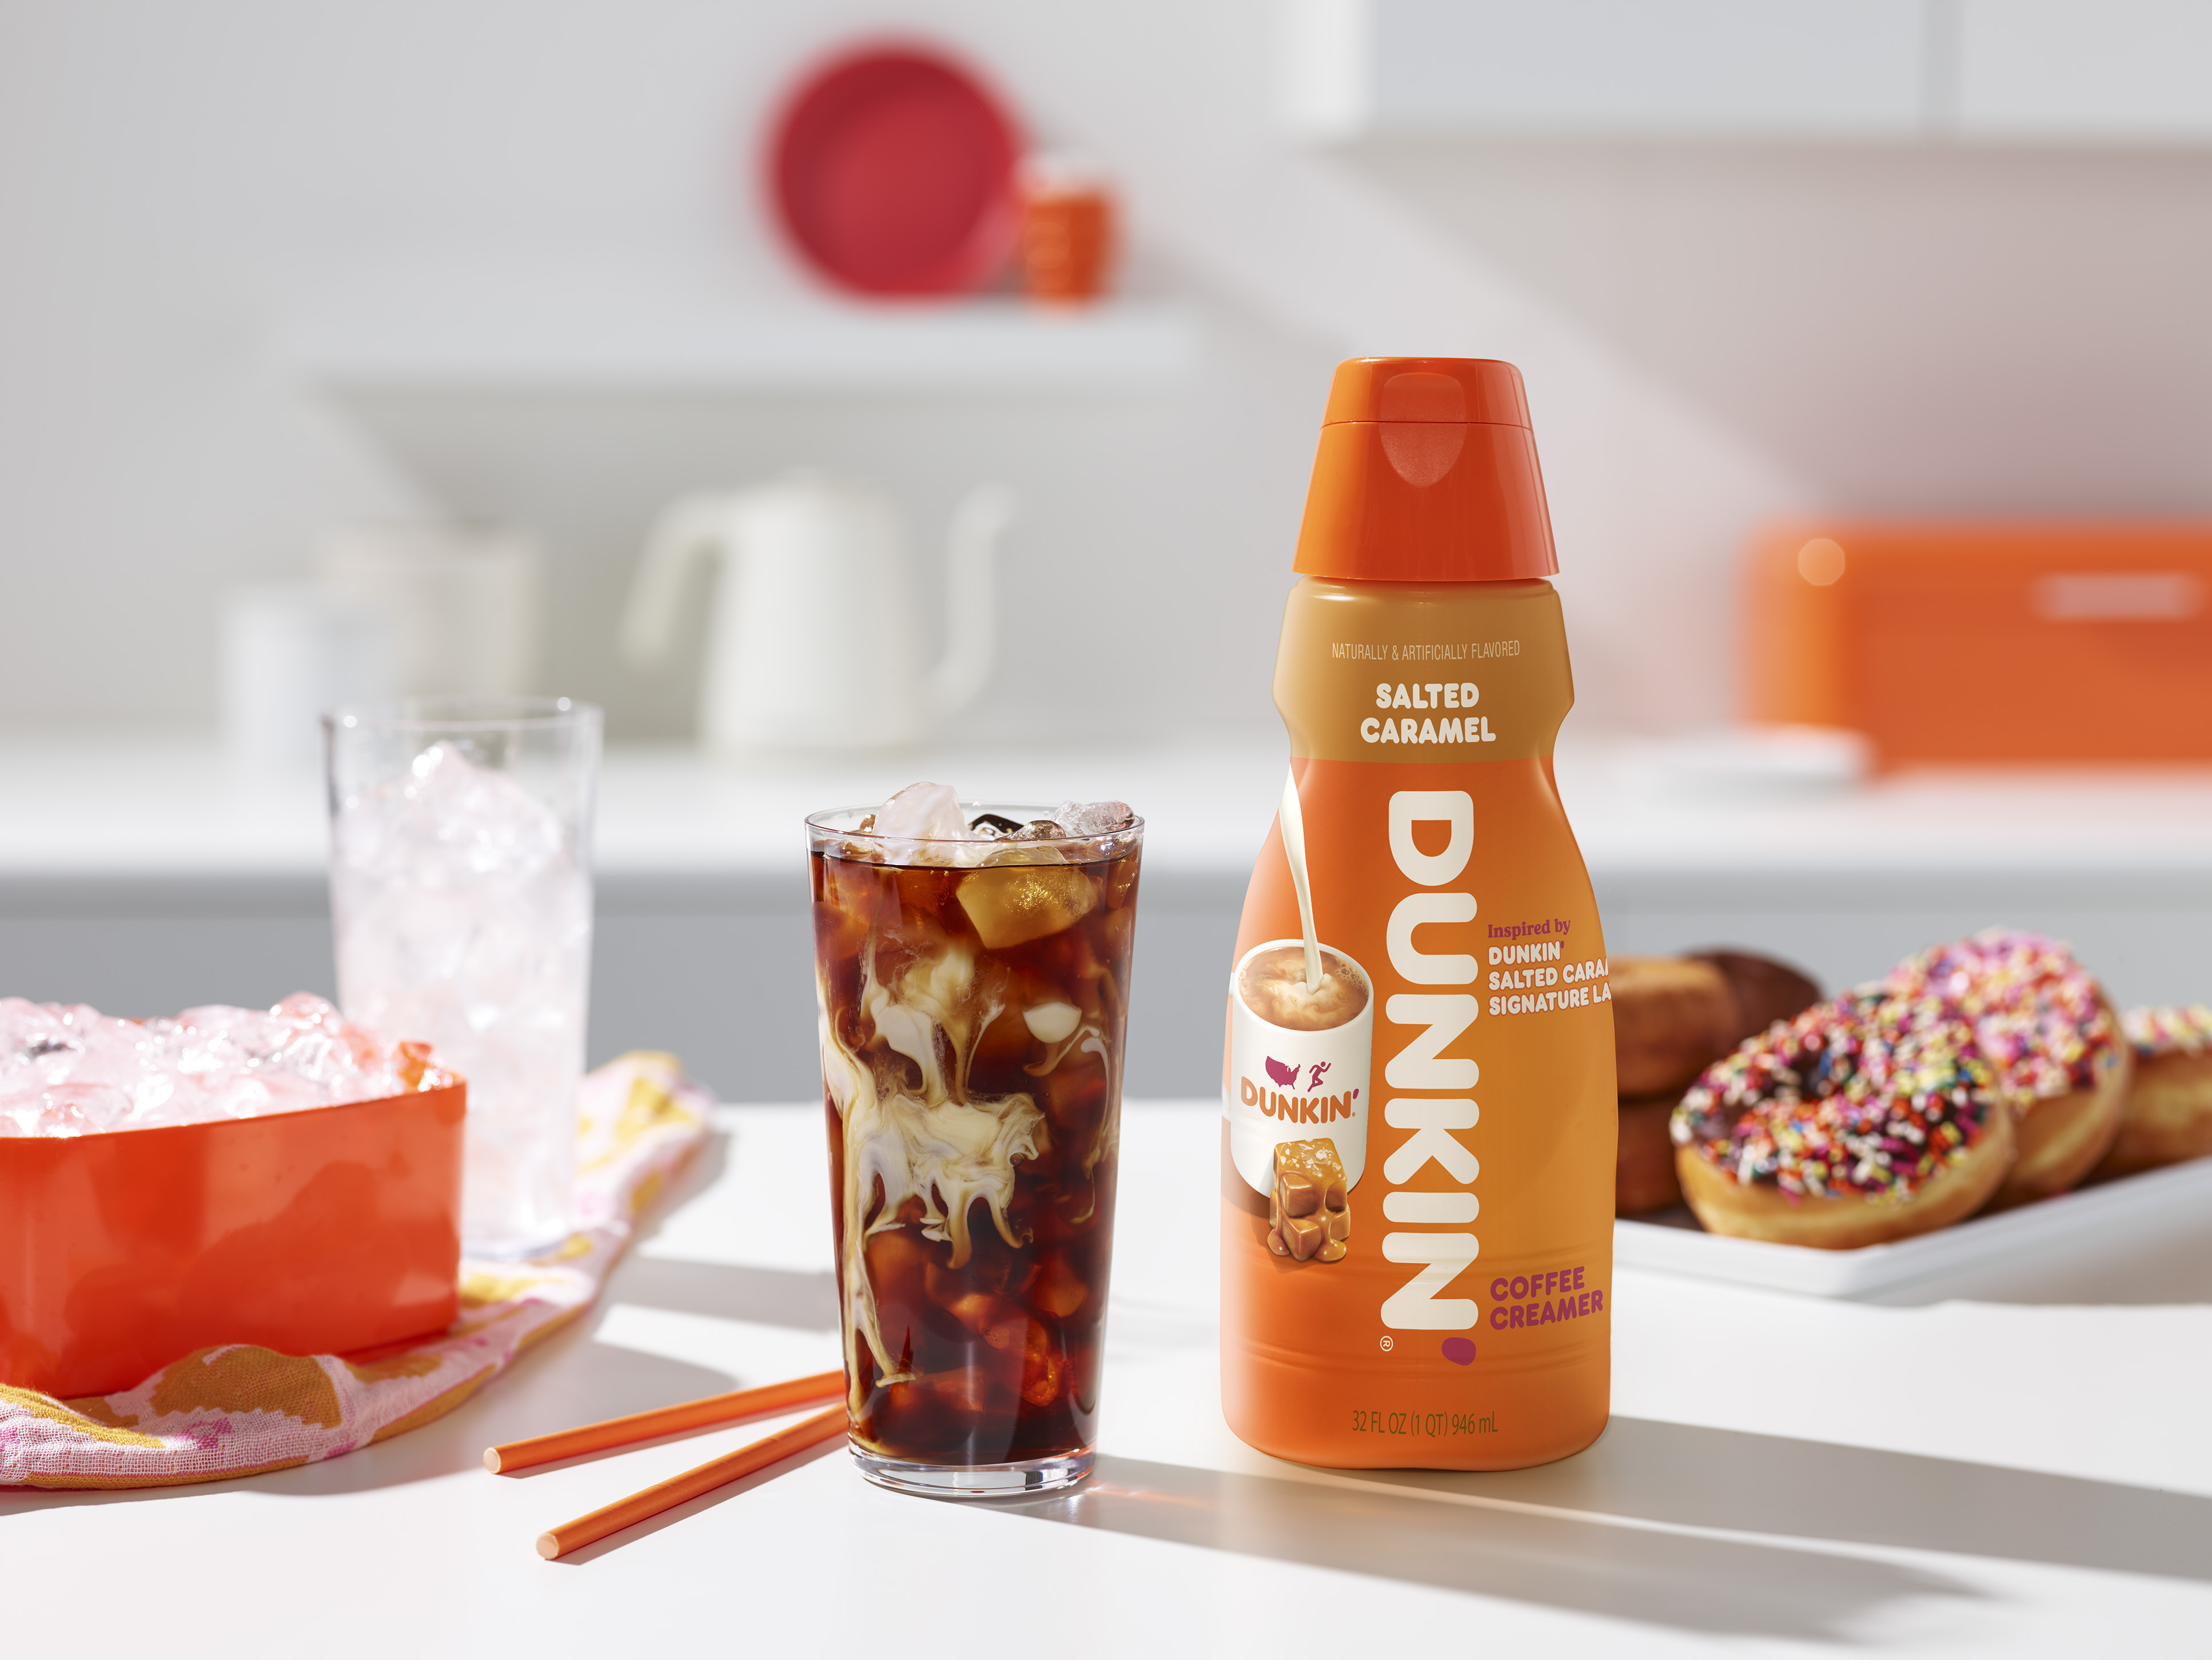 Dunkin' Donuts Launches Cold Brew Coffee